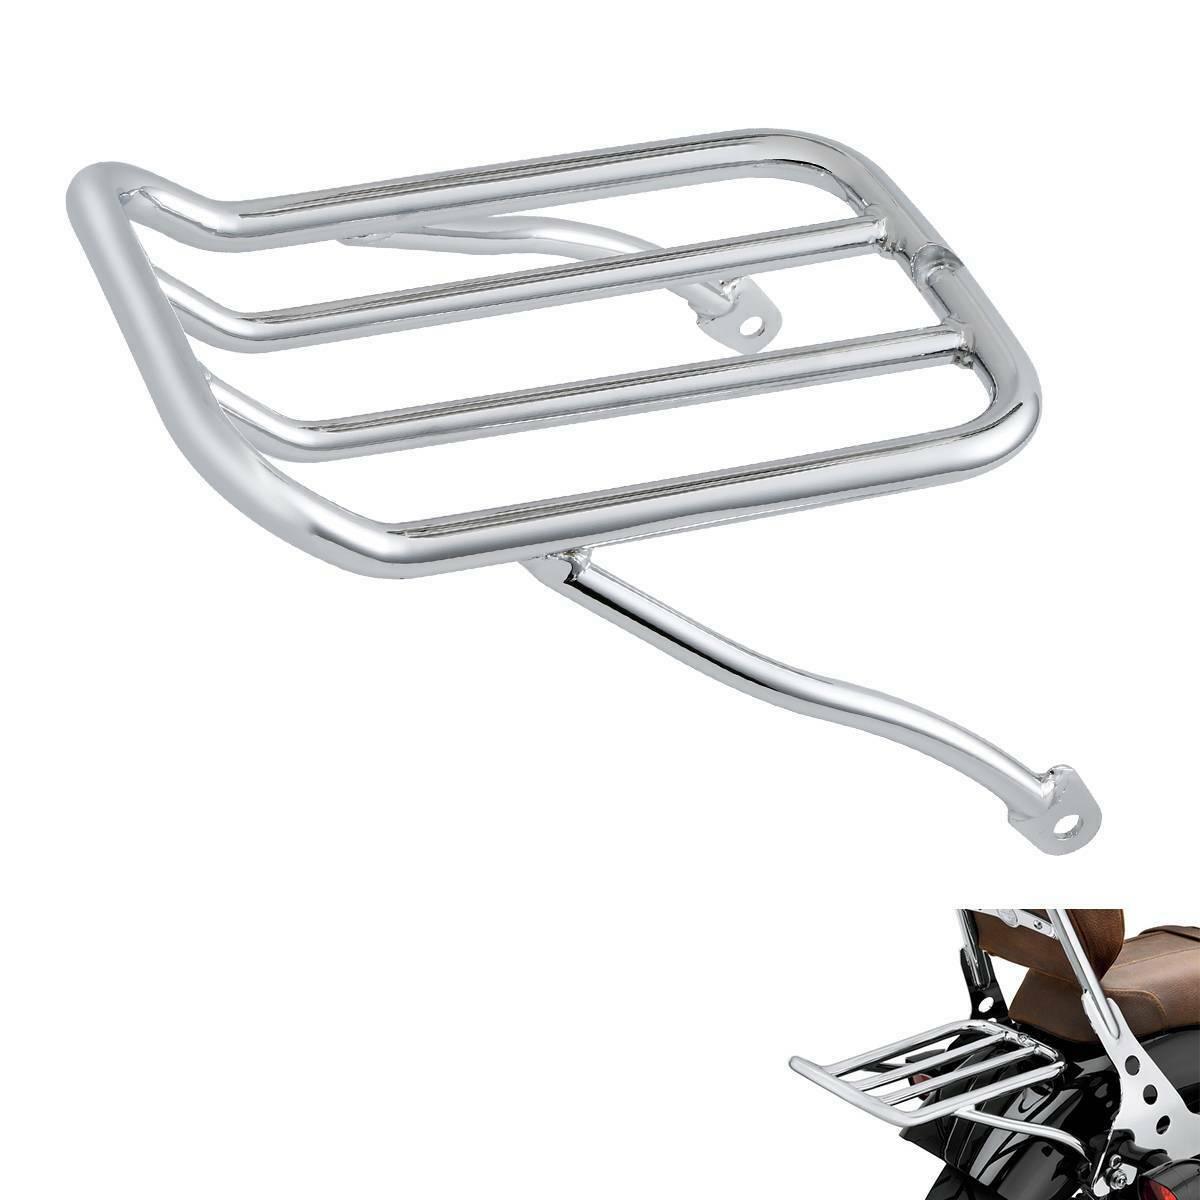 Chrome Rear Fender Luggage Rack Fit For Harley Sportster XL883 XL1200 2009-2022 - Moto Life Products